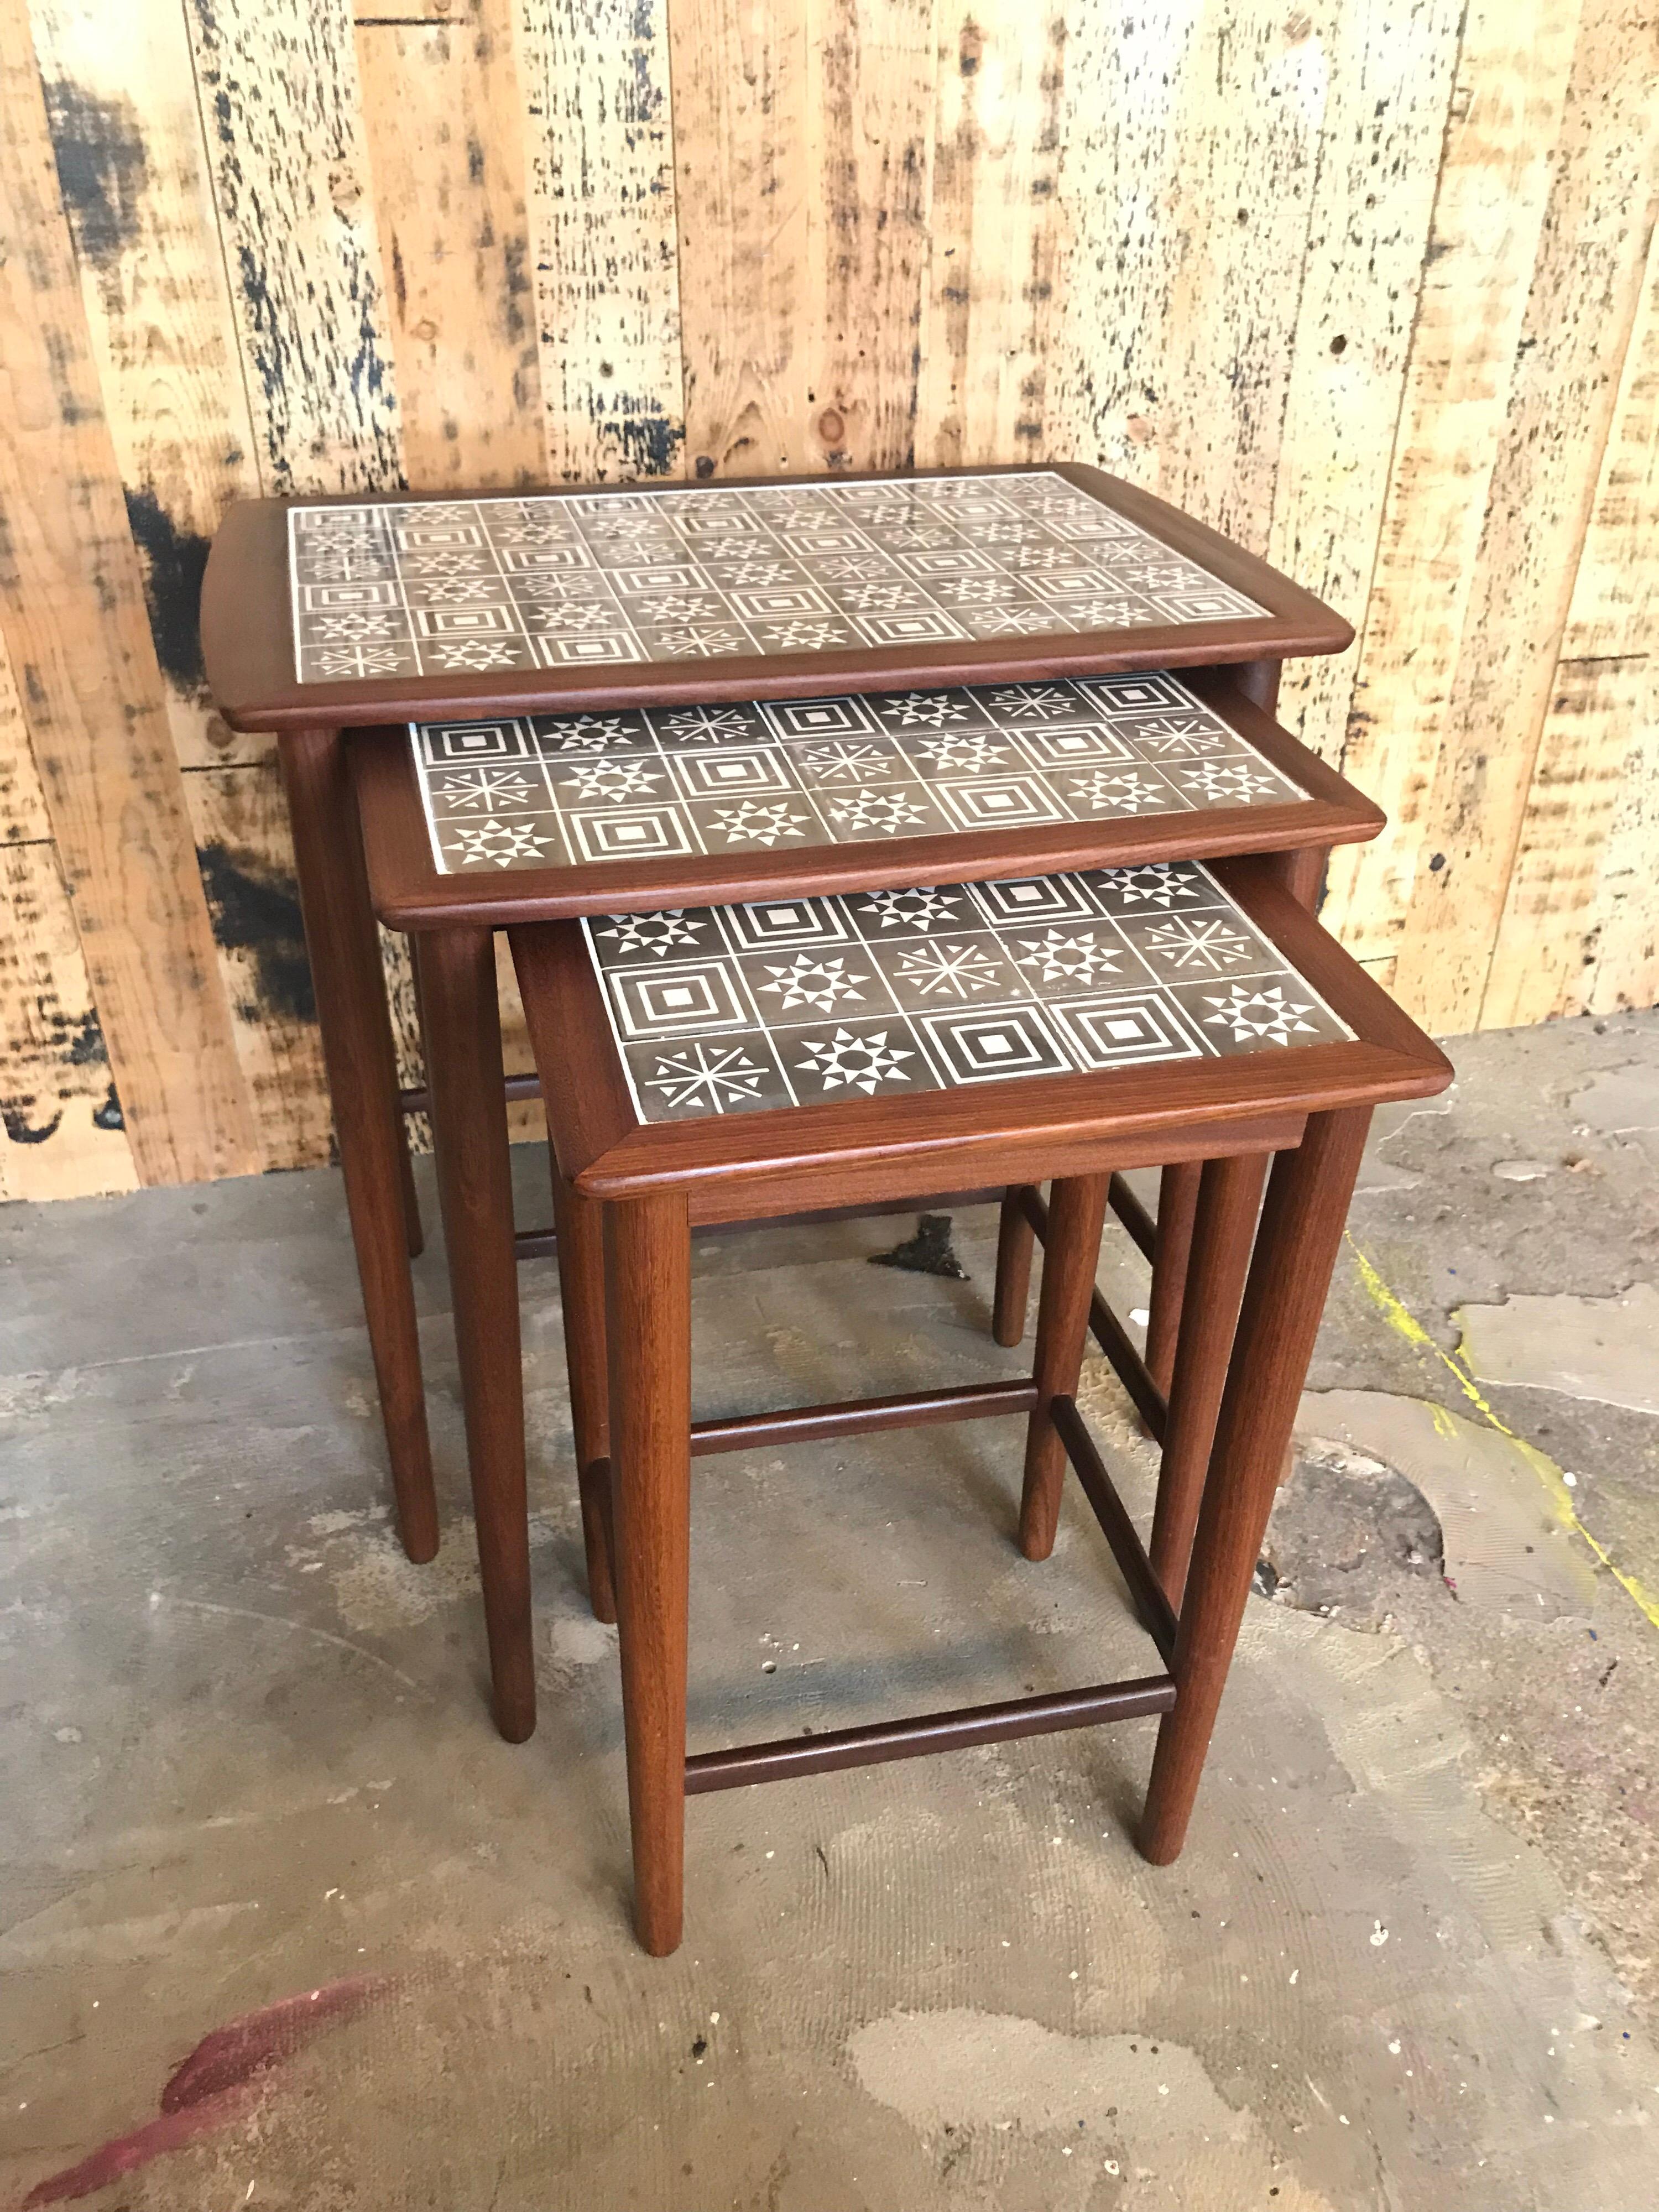 Stylish classic vintage midcentury teak nesting tables with inlaid ceramic tiles and with geometric patterns on plywood.
 